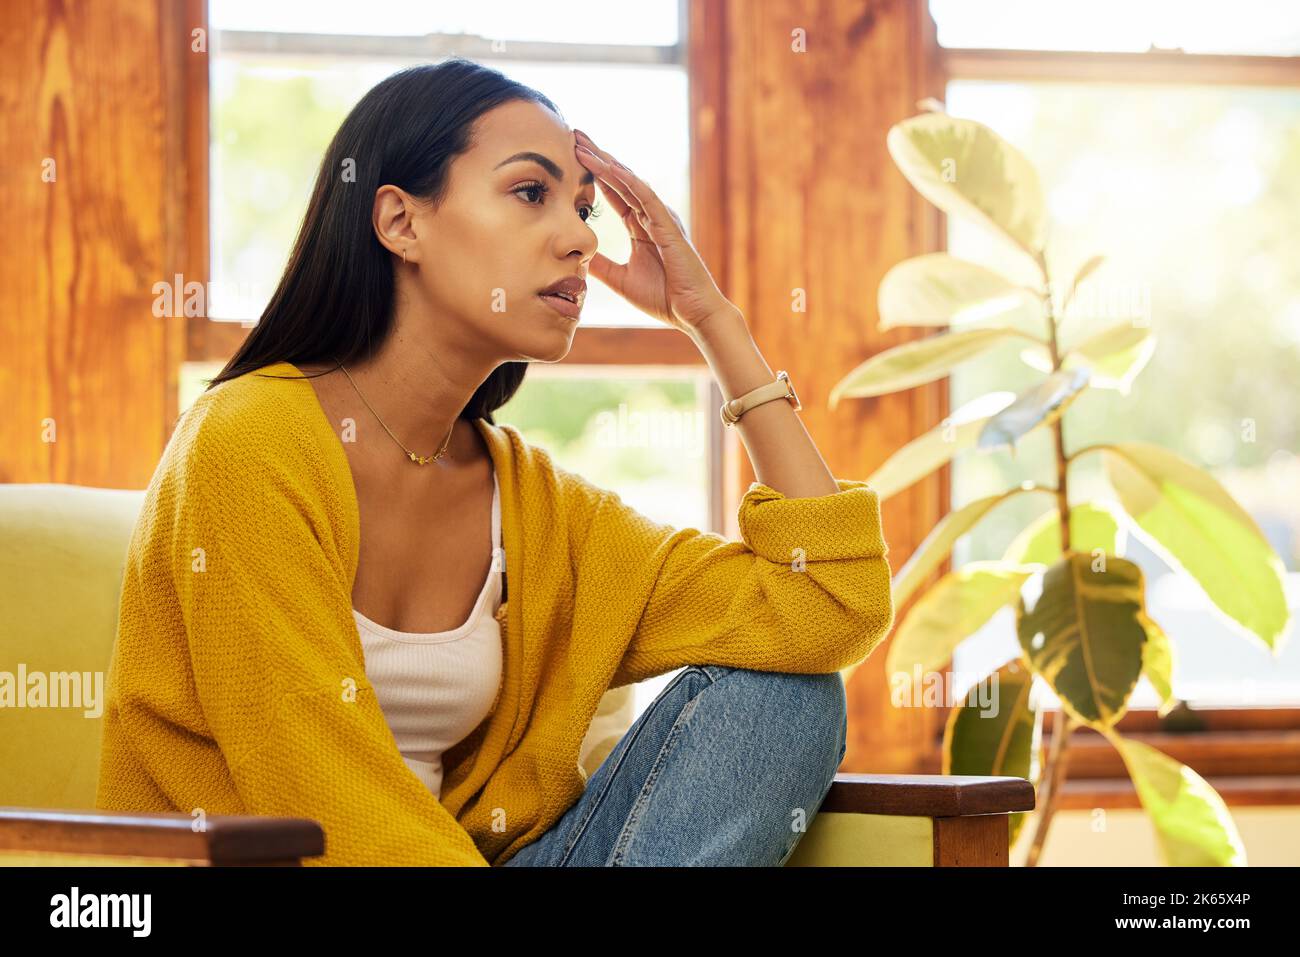 Sad, depressed and thinking woman with mental health problems and anxiety in home. Latino female in depression, stress and fear feeling frustrated Stock Photo